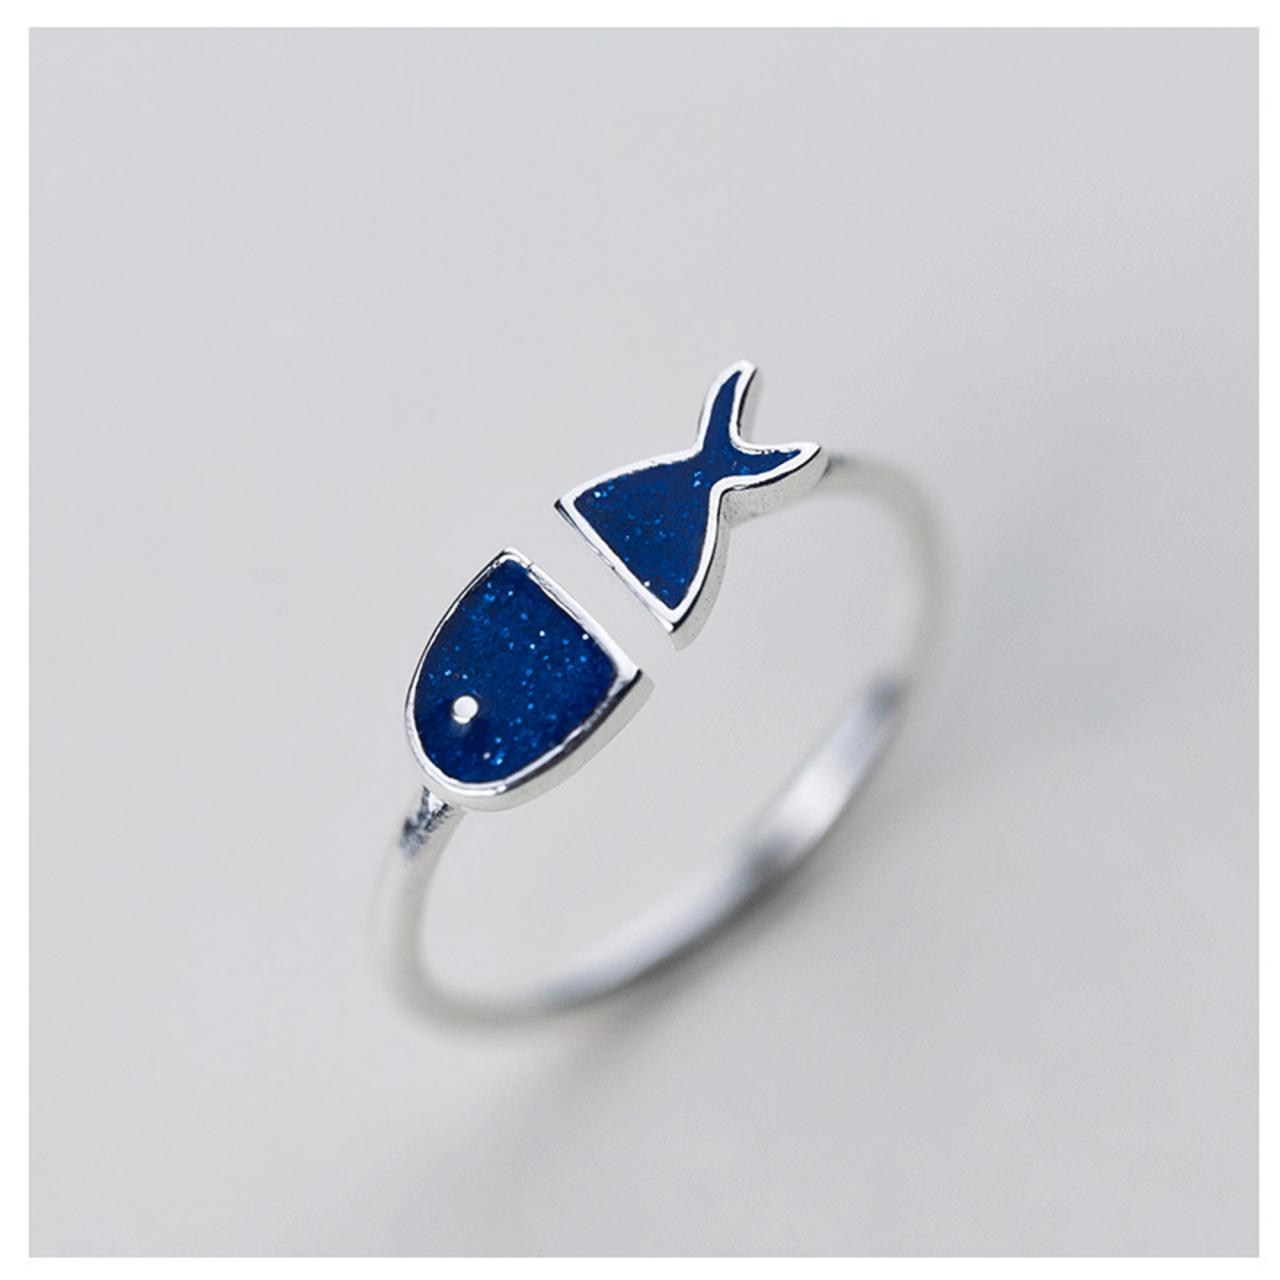 Blue Fish Ring, Sterling Silver Adjustable Fish Ring, Minimalist Rings, Dainty Ring, Women Fish Ring, Everyday Jewelry